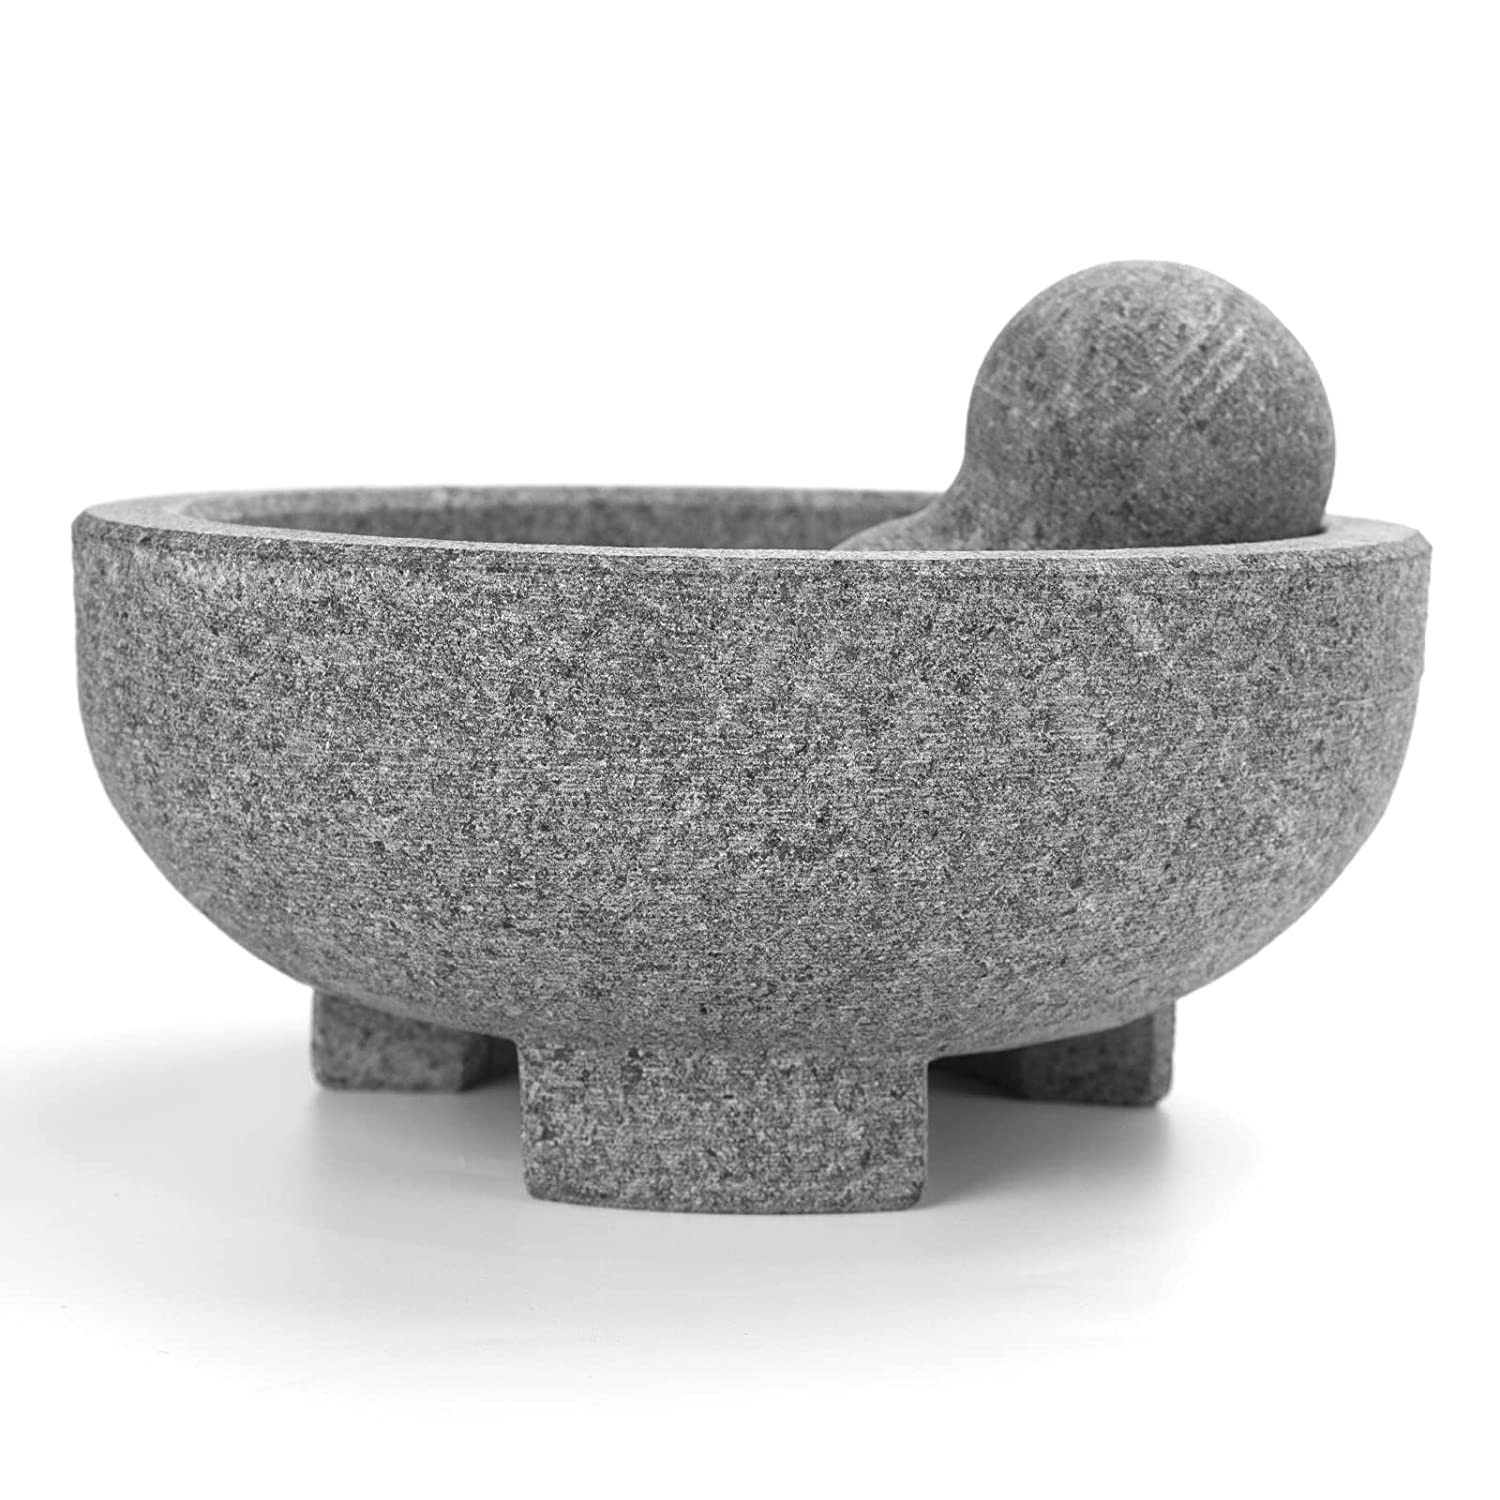 Mortar and Pestle Set, 8 Inch 4 Cups Large Capacity Unpolished Granite Molcajete